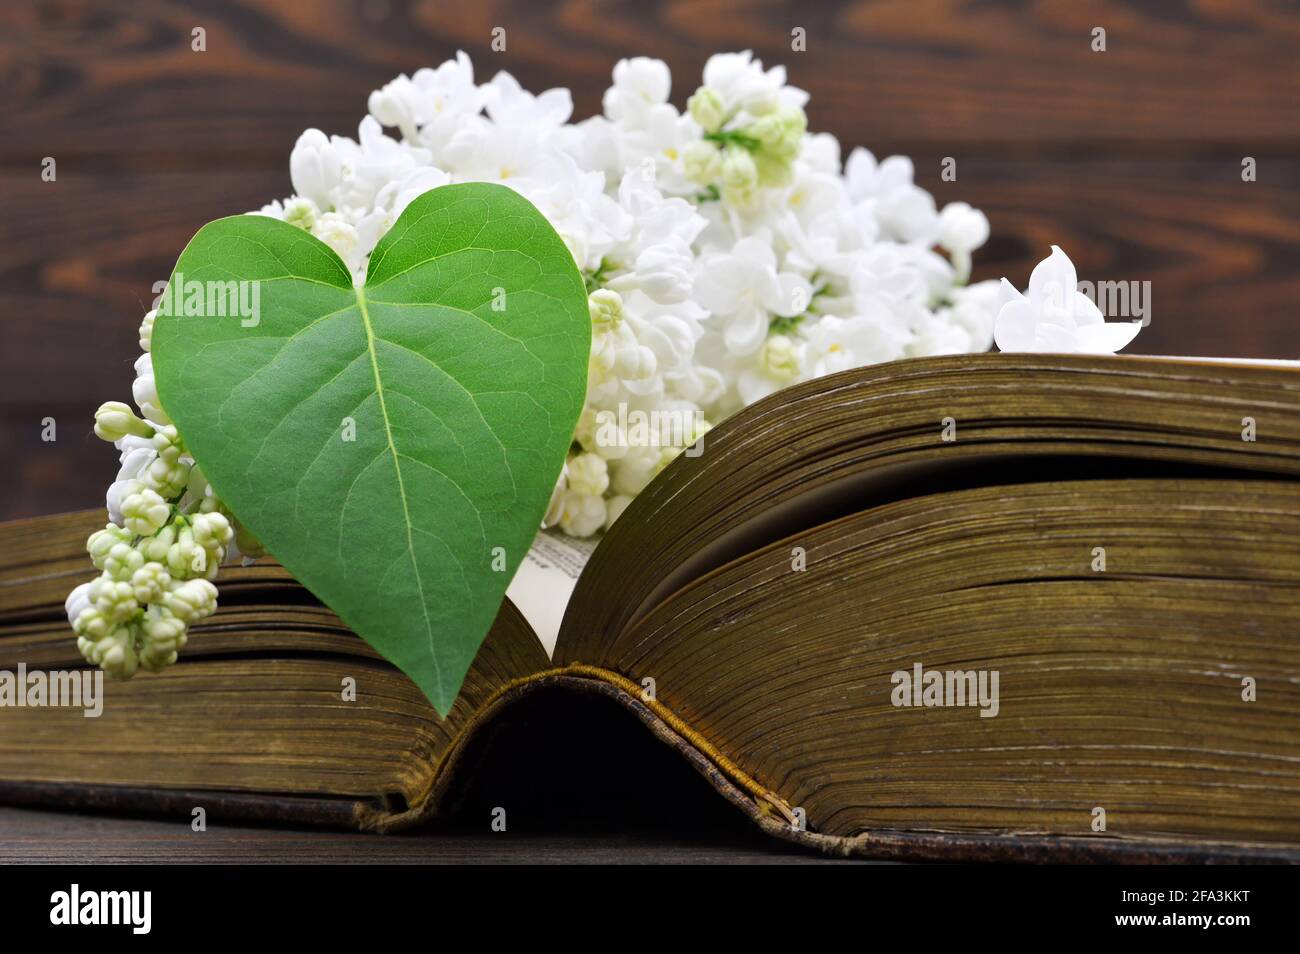 Mothers Day card with with heart shaped leaf, white lilac flower and open old book Stock Photo